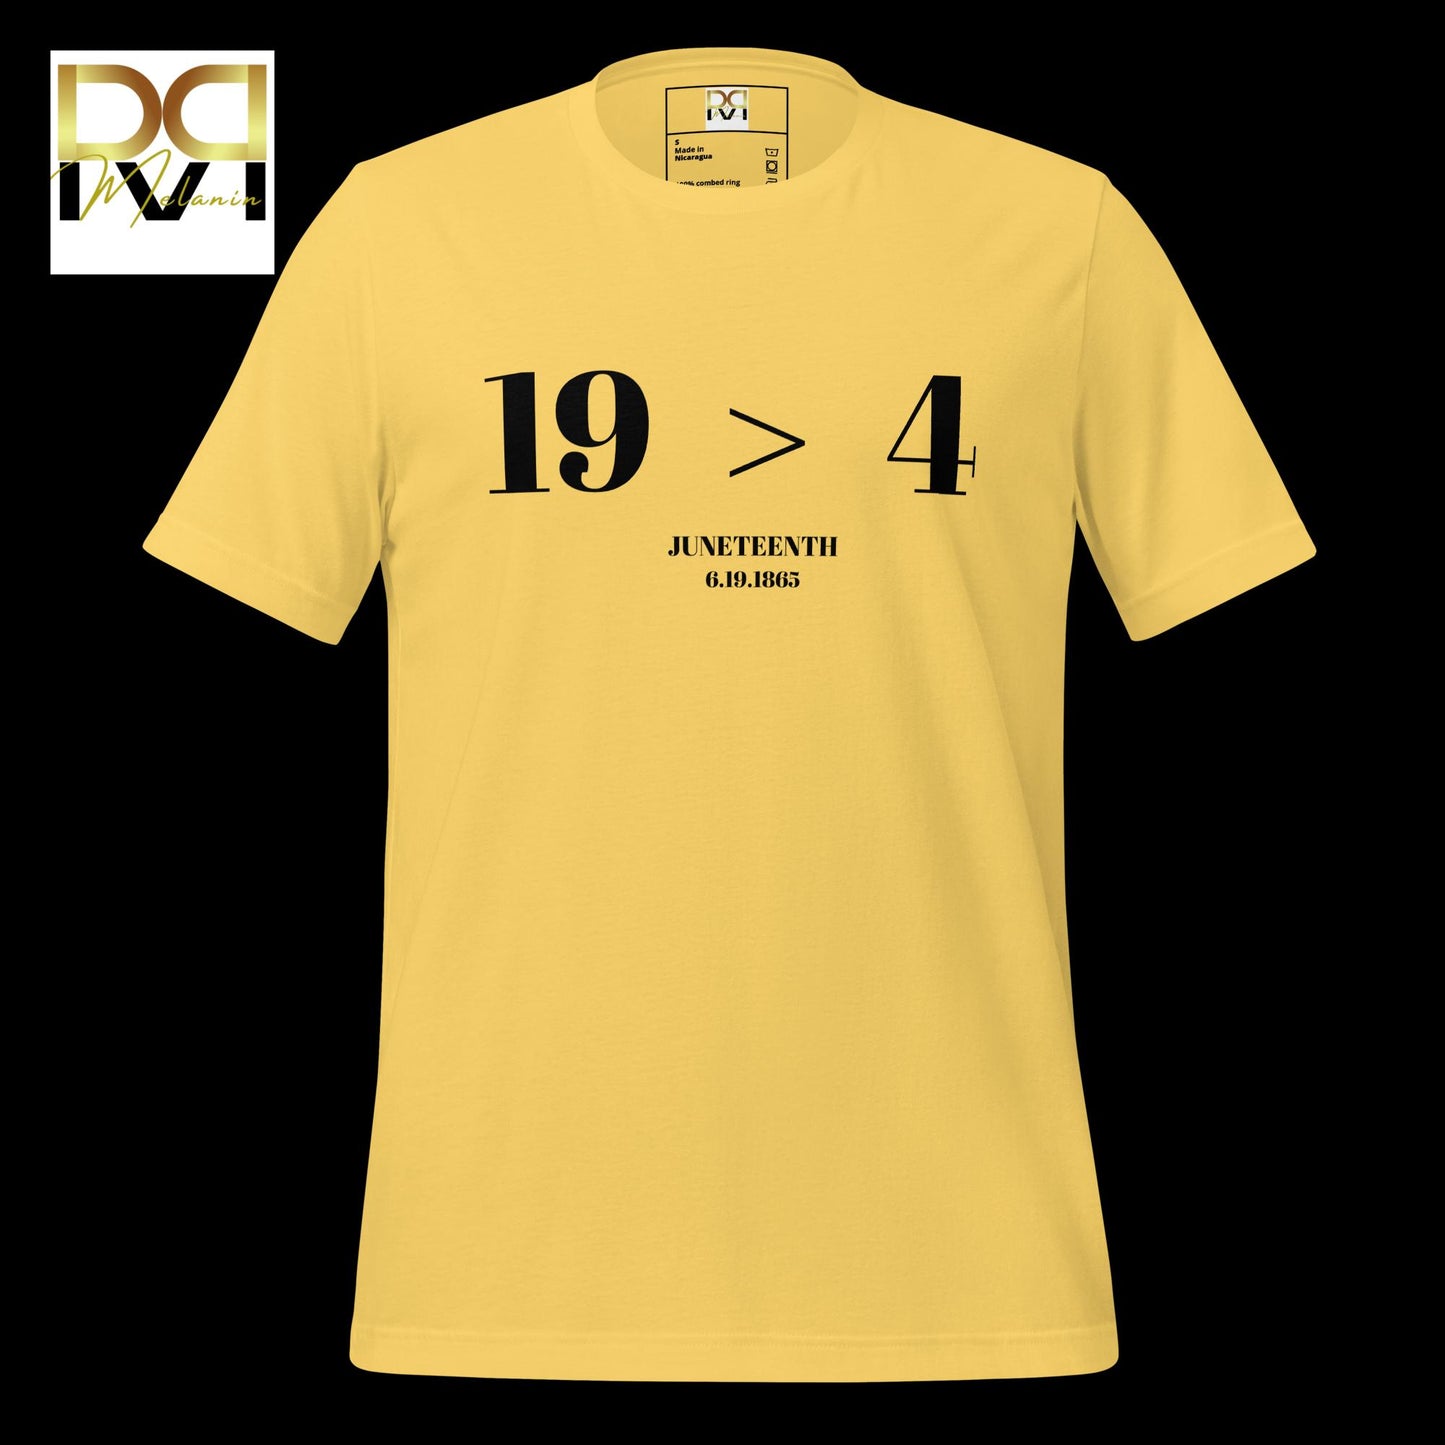 "19 is Greater Than 4" Juneteenth T-Shirt - Celebrate Freedom with Style